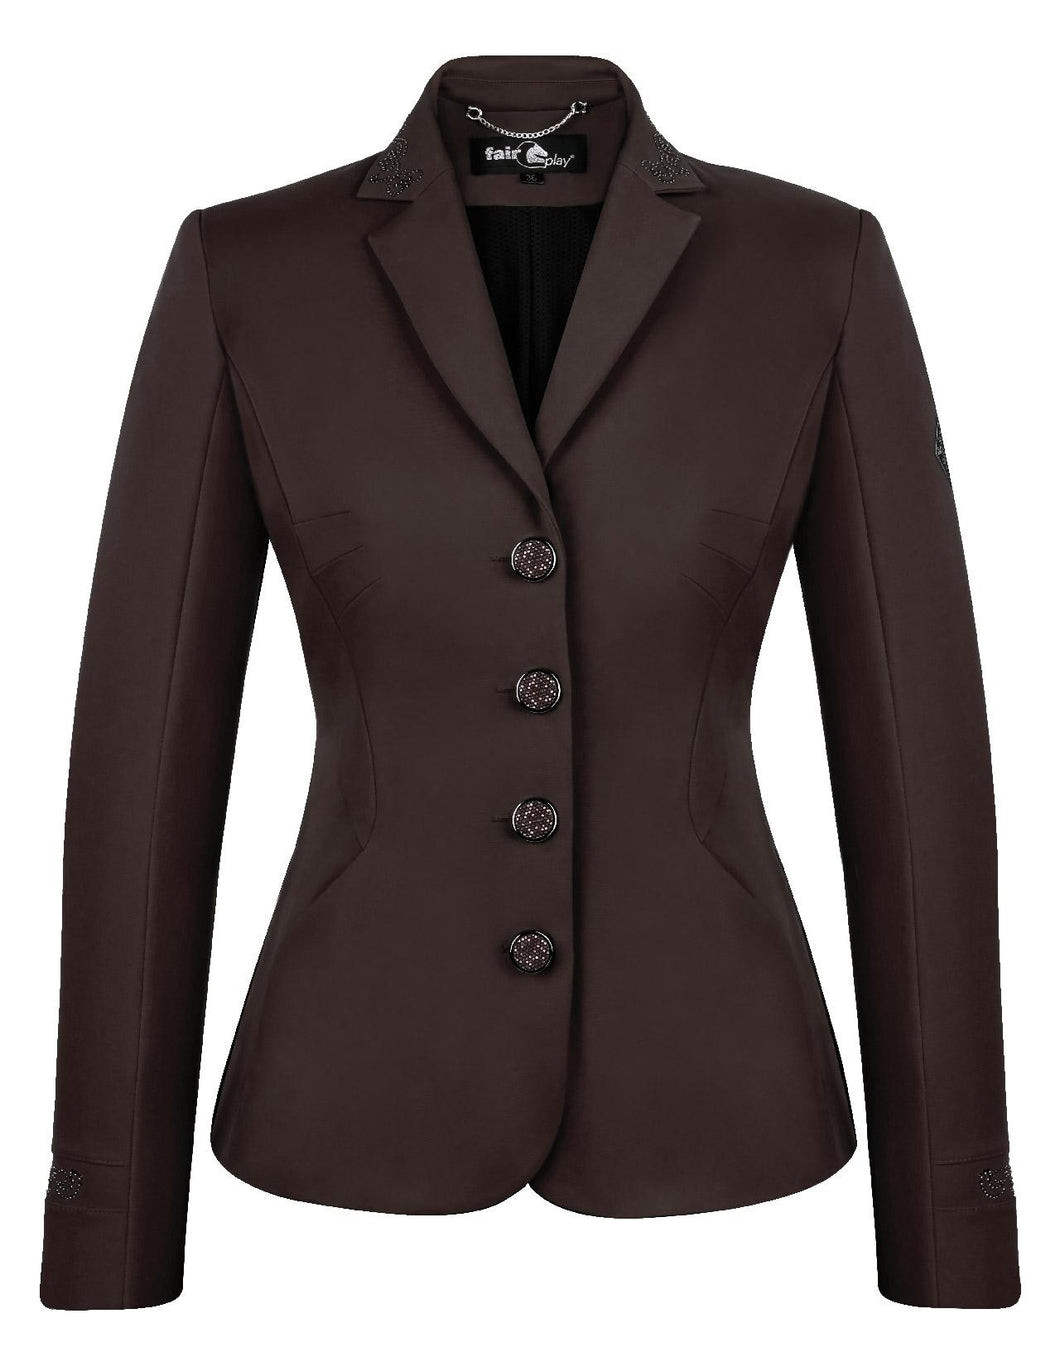 Fair Play Show Jacket TAYLOR CHIC, Brown